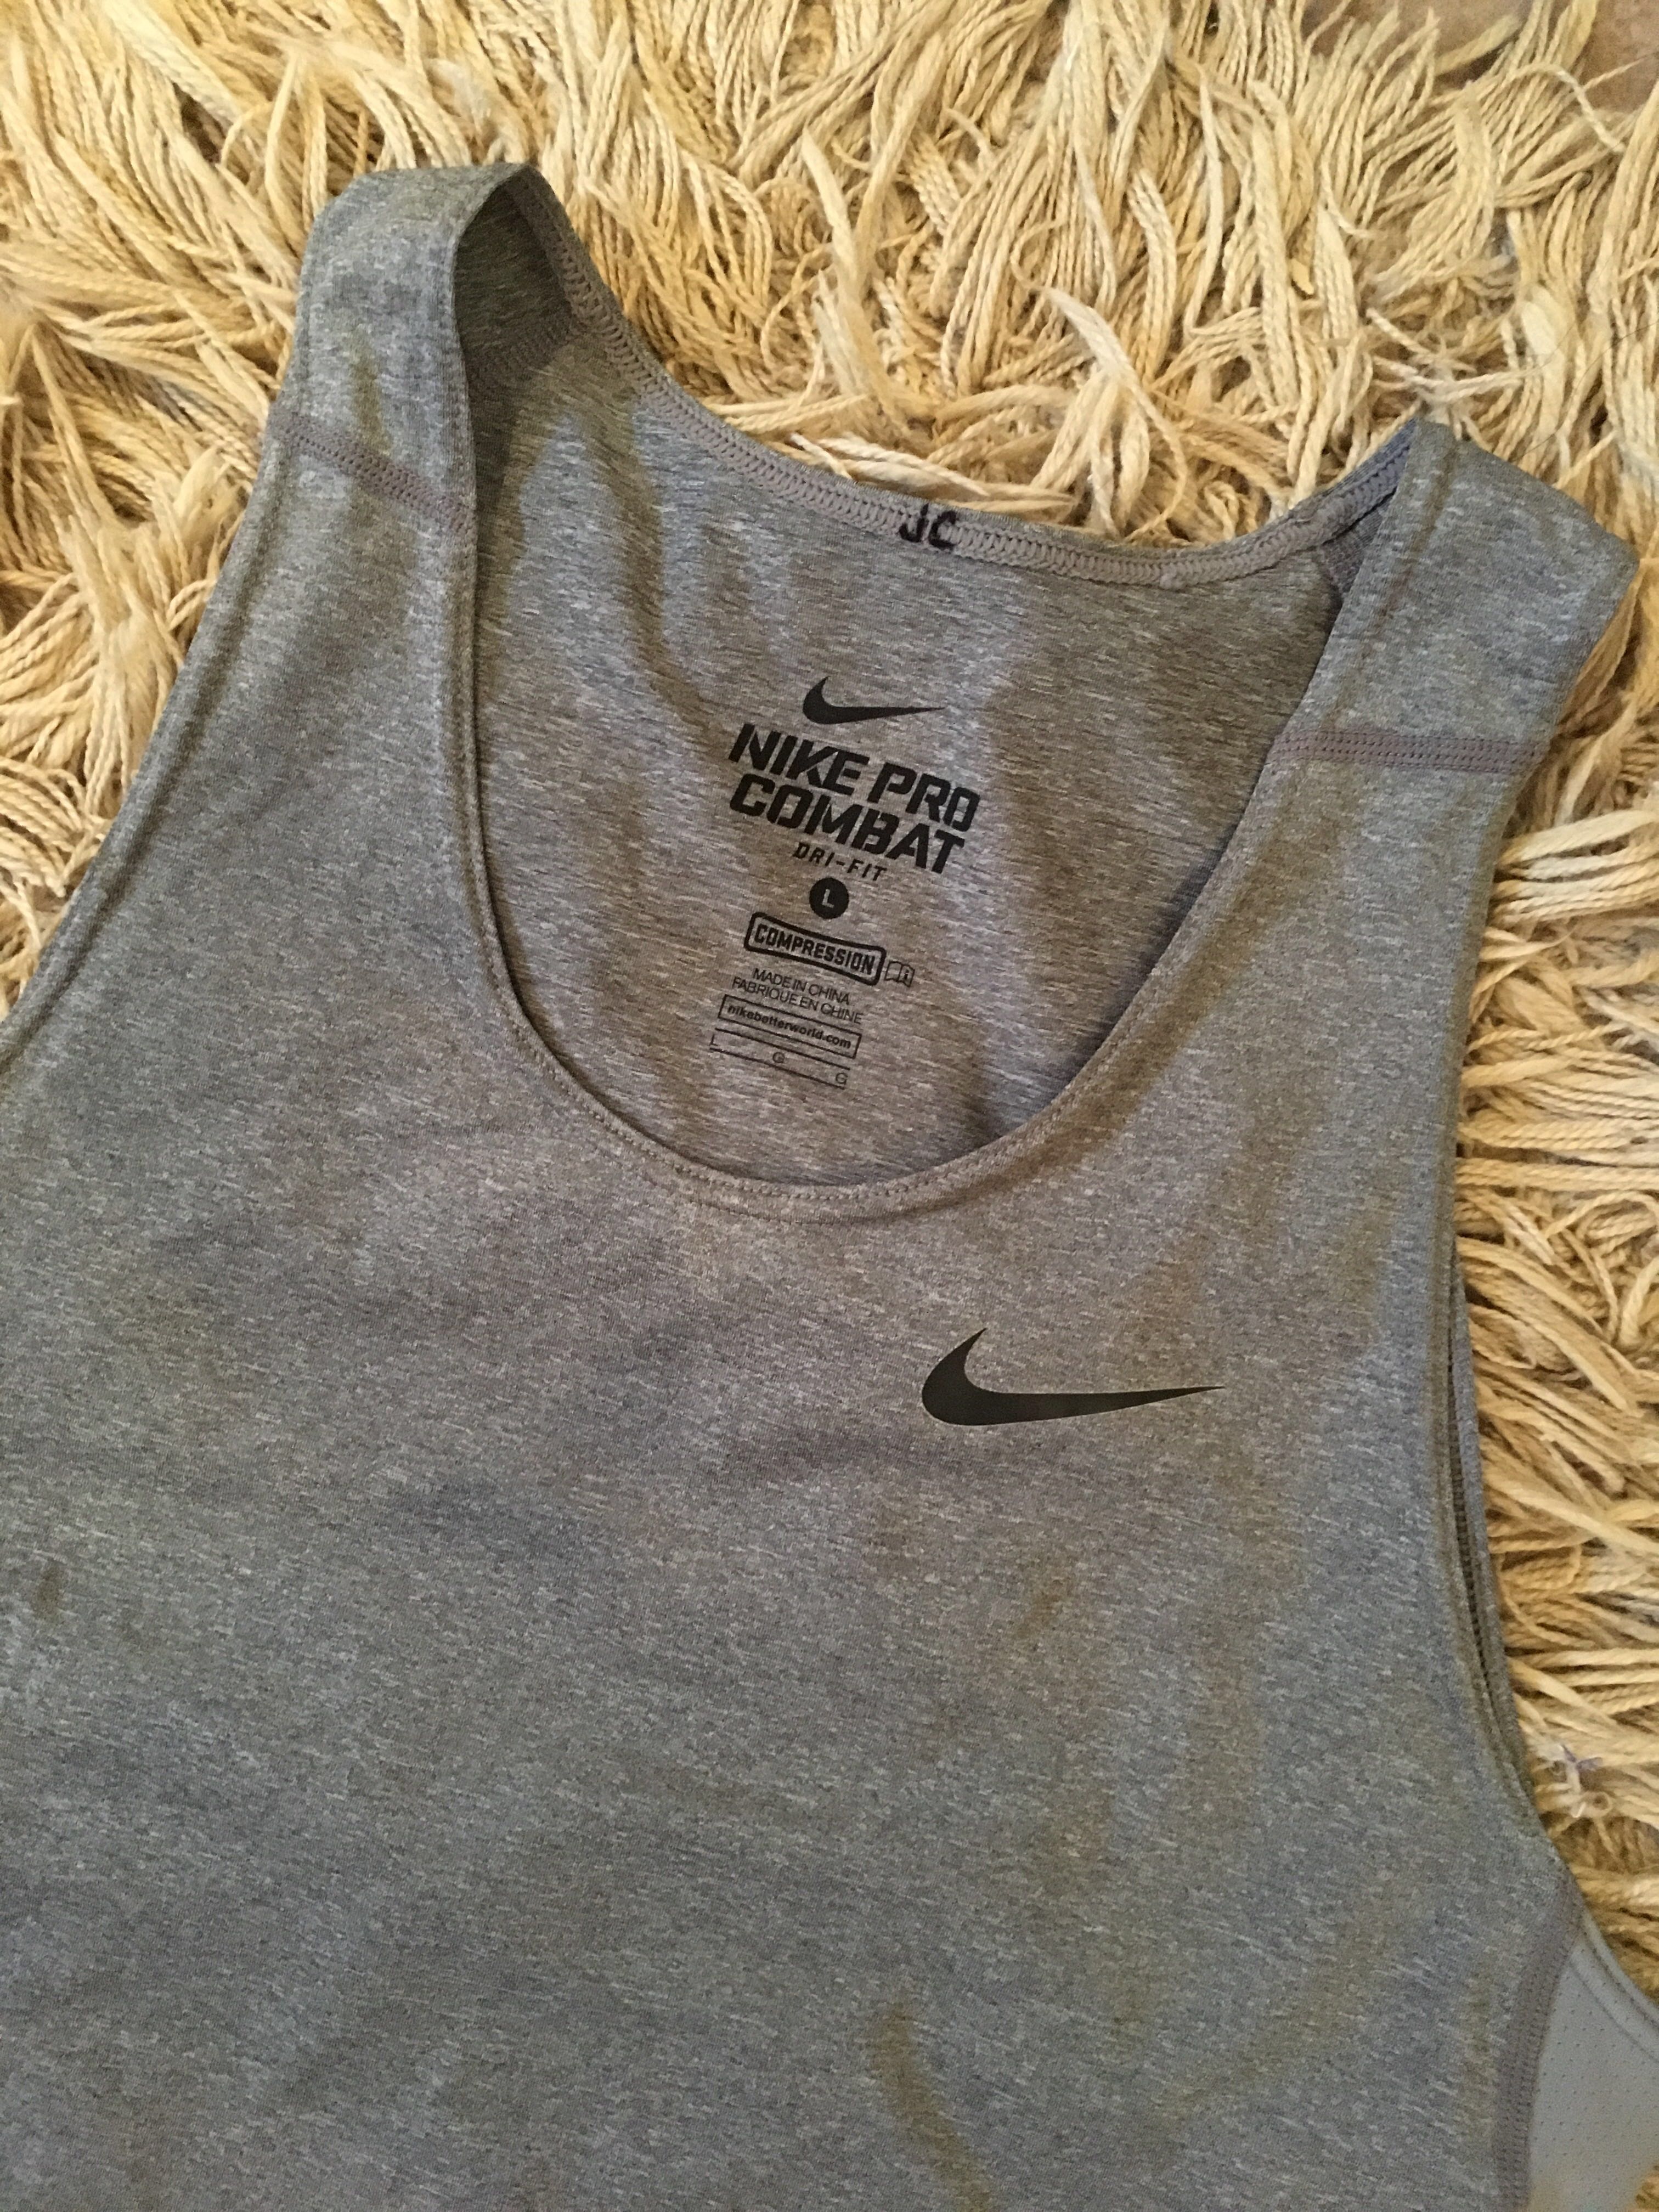 https://media.karousell.com/media/photos/products/2018/07/29/nike_pro_combat_compression_tank_top_1532856441_35182bbe.jpg